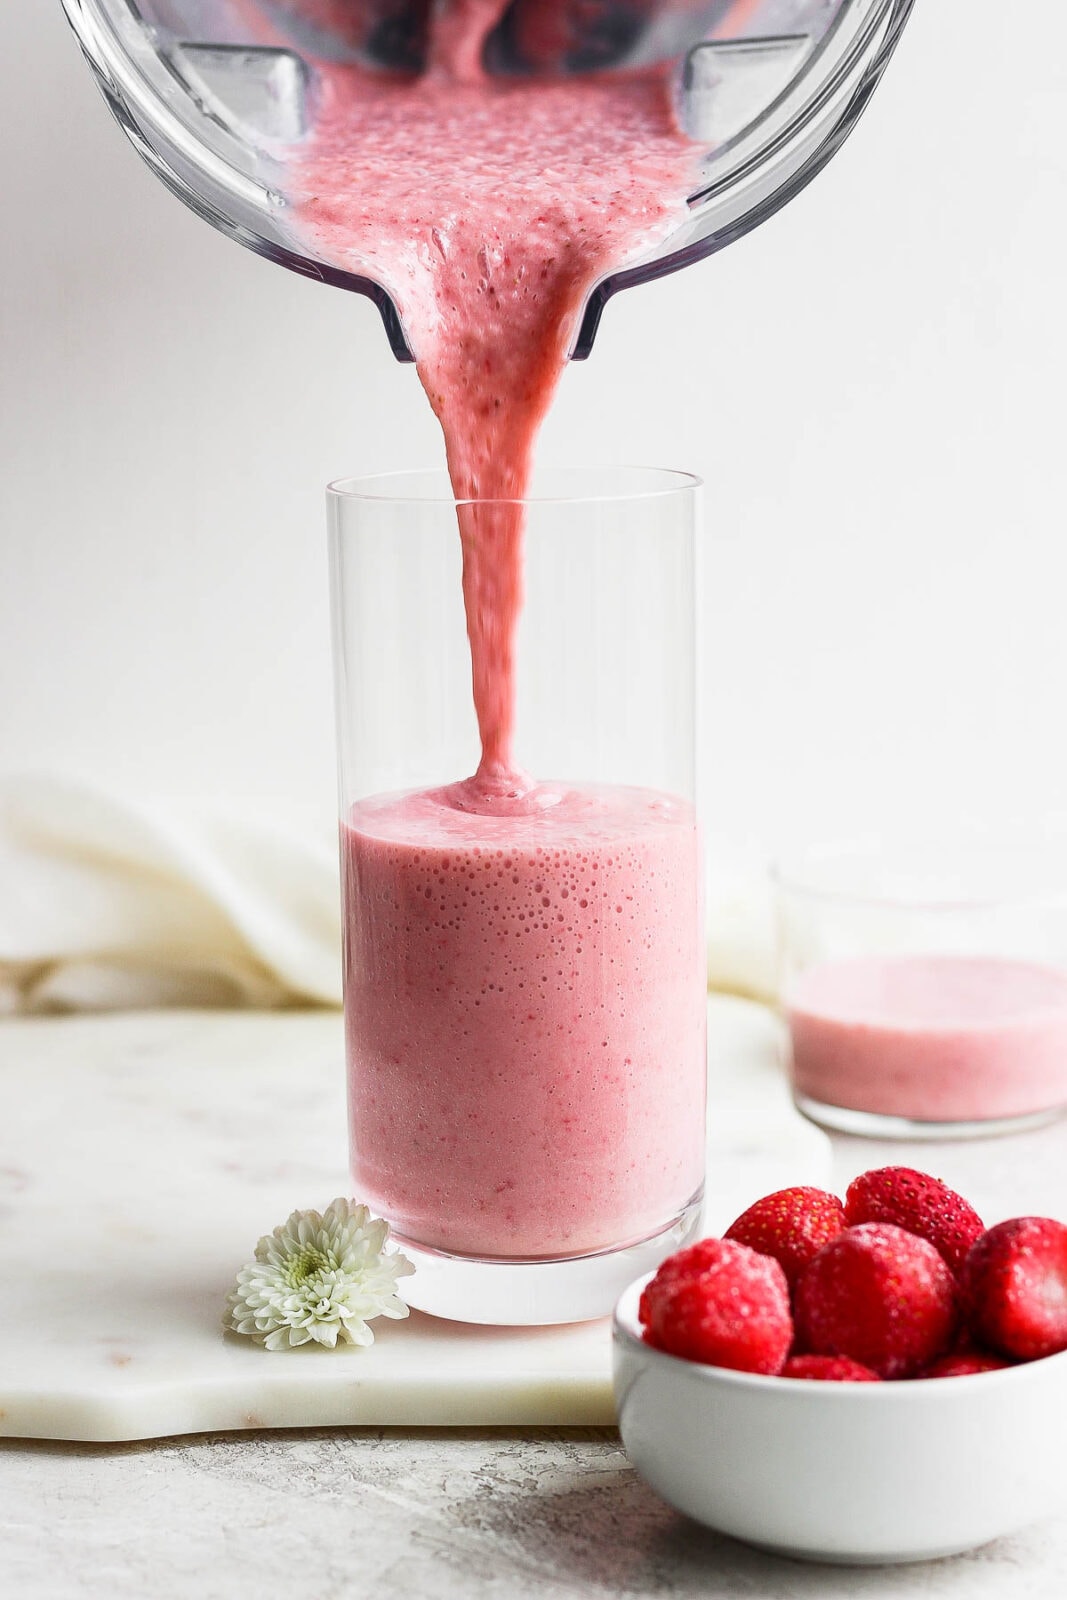 A strawberry banana smoothie being poured from a blender to a glass.